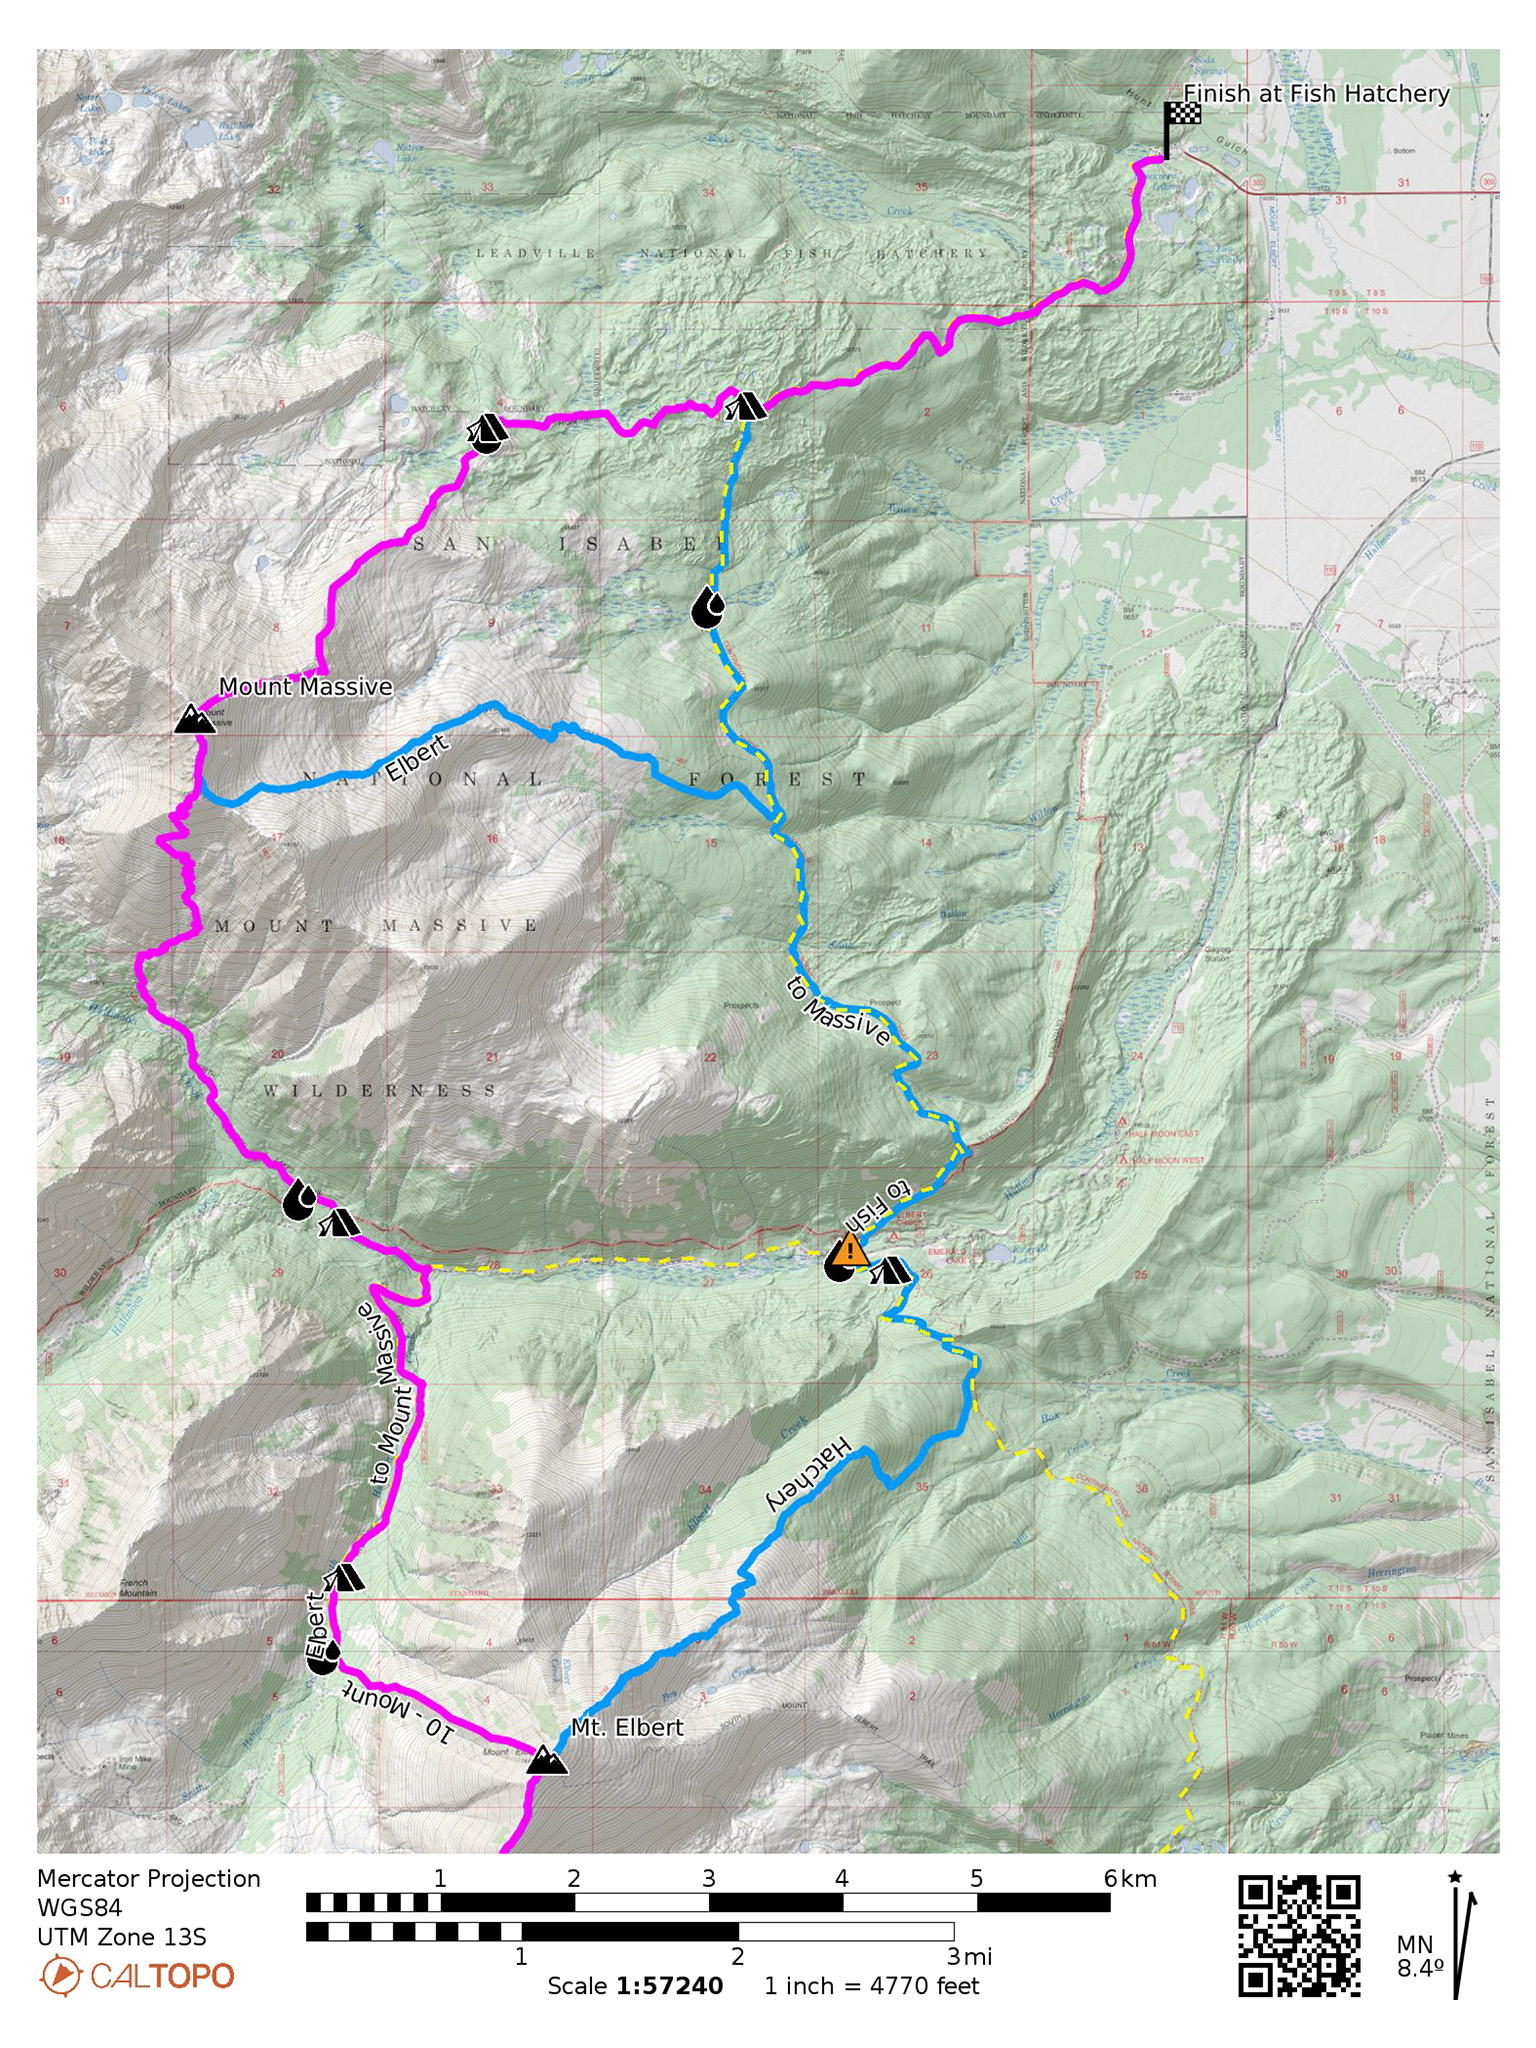 Mount Elbert to Mount Massive and finish at Fish Hatchery